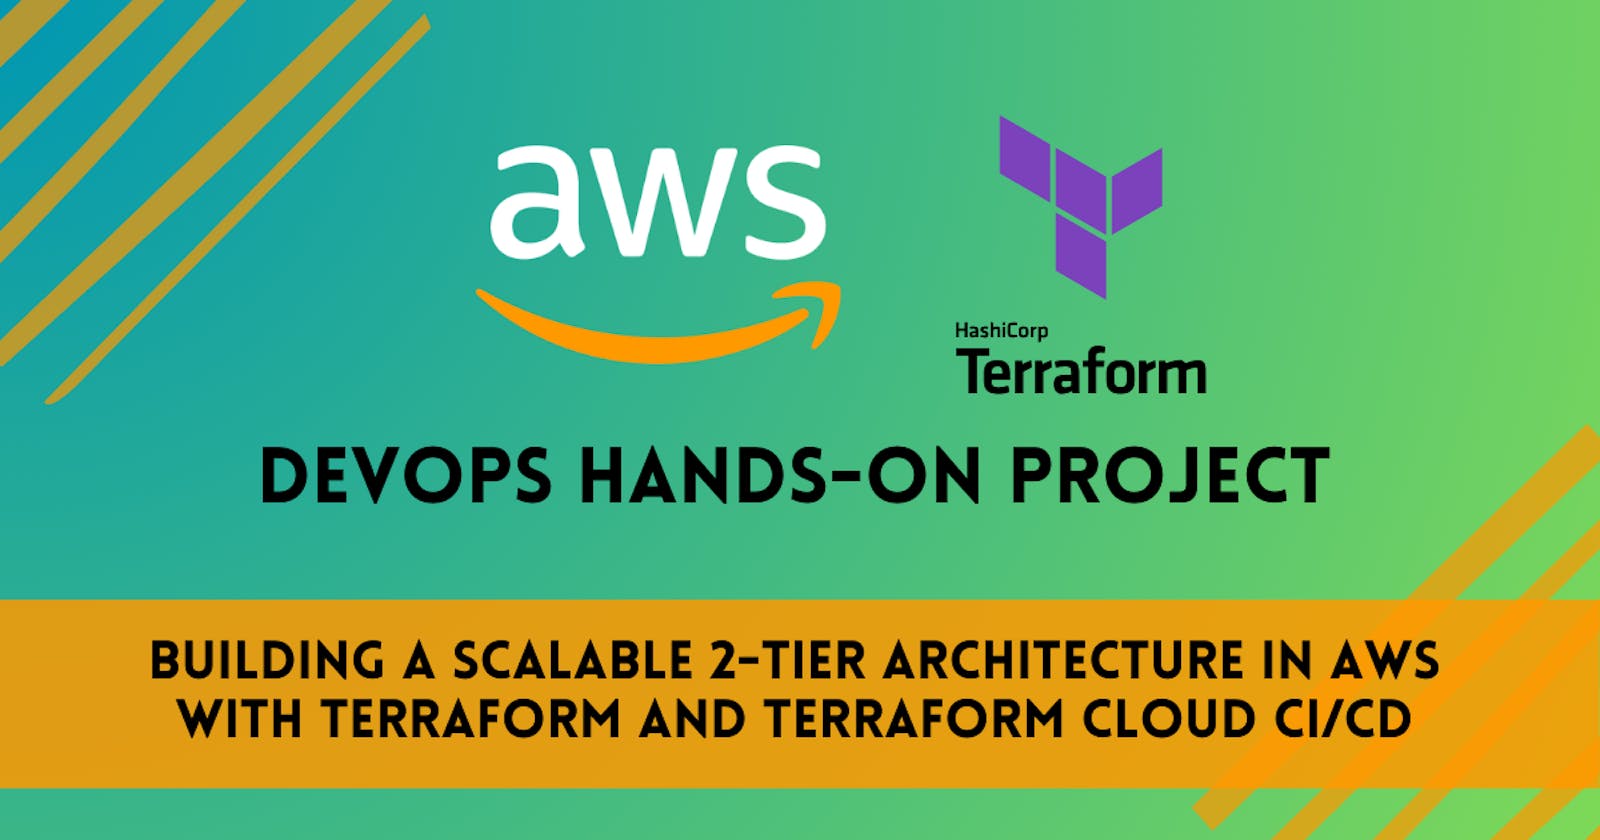 Building a Scalable 2-Tier Architecture in AWS with Terraform and Terraform Cloud CI/CD